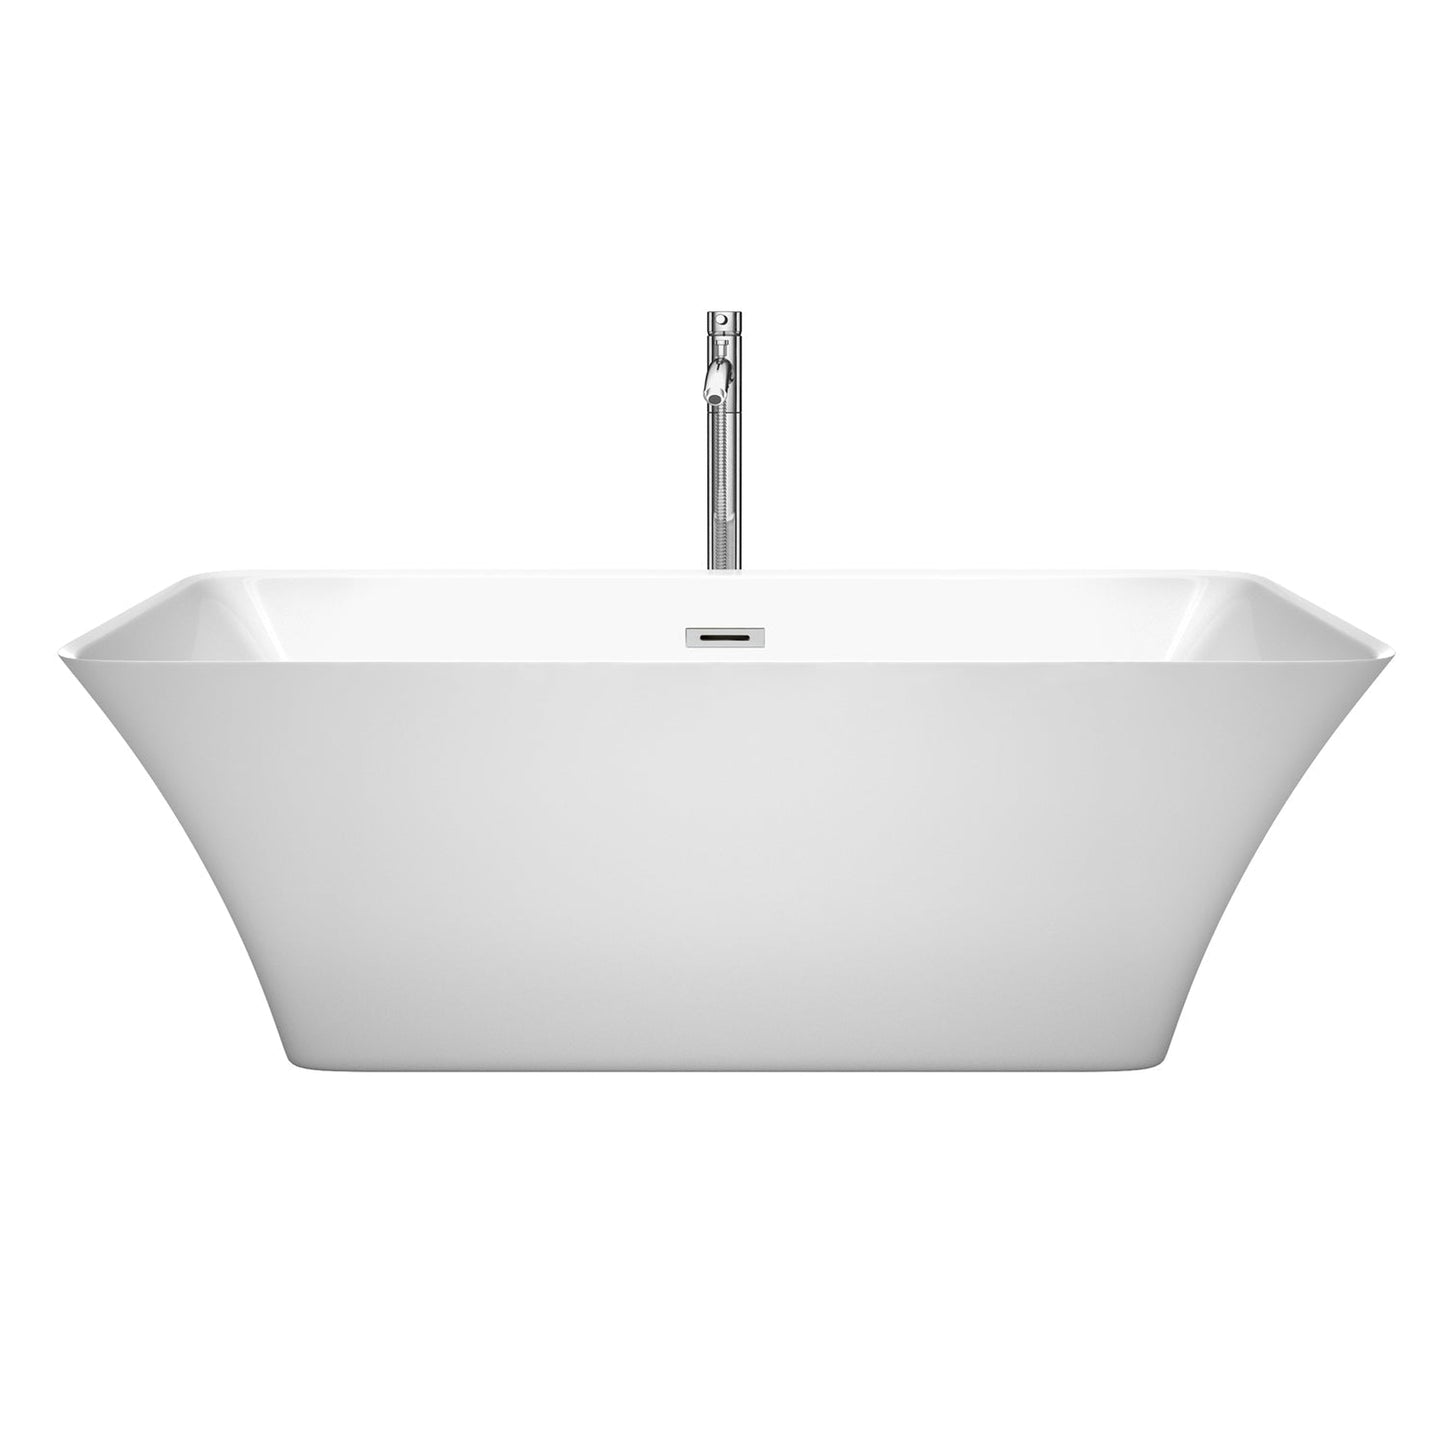 Wyndham Collection Tiffany 67" Freestanding Bathtub in White With Floor Mounted Faucet, Drain and Overflow Trim in Polished Chrome